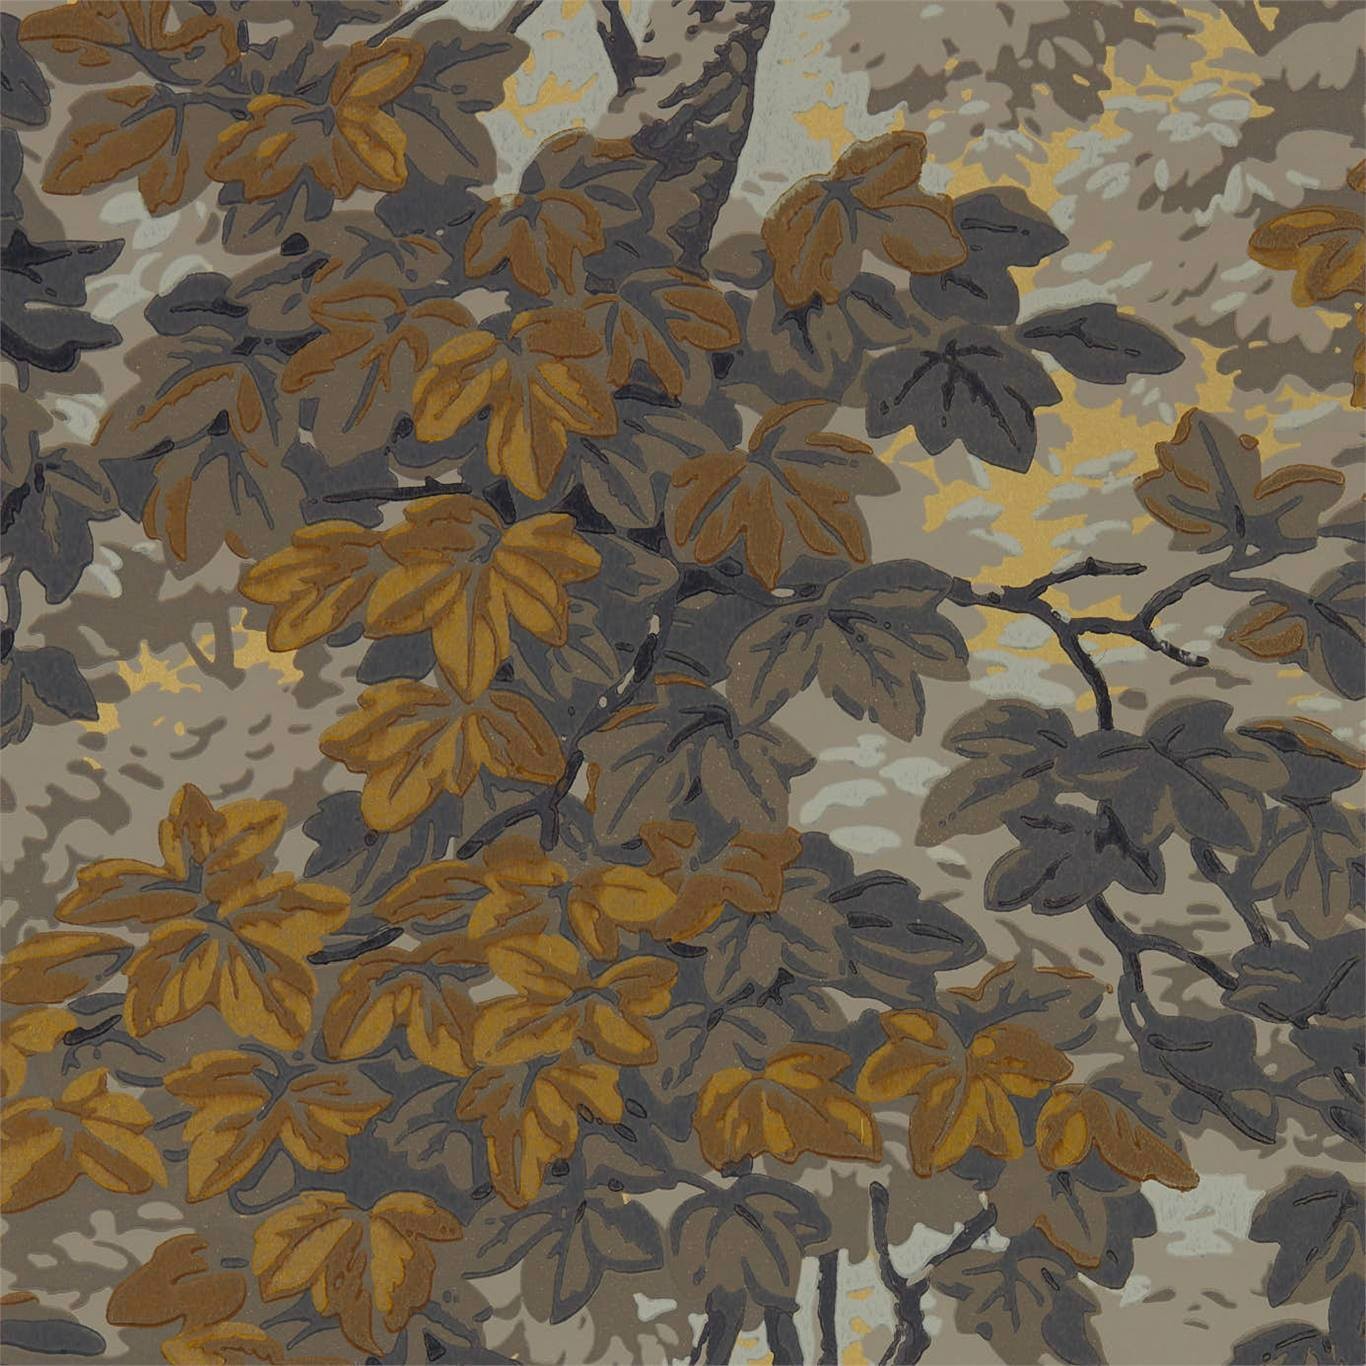 a painting of a tree with yellow leaves